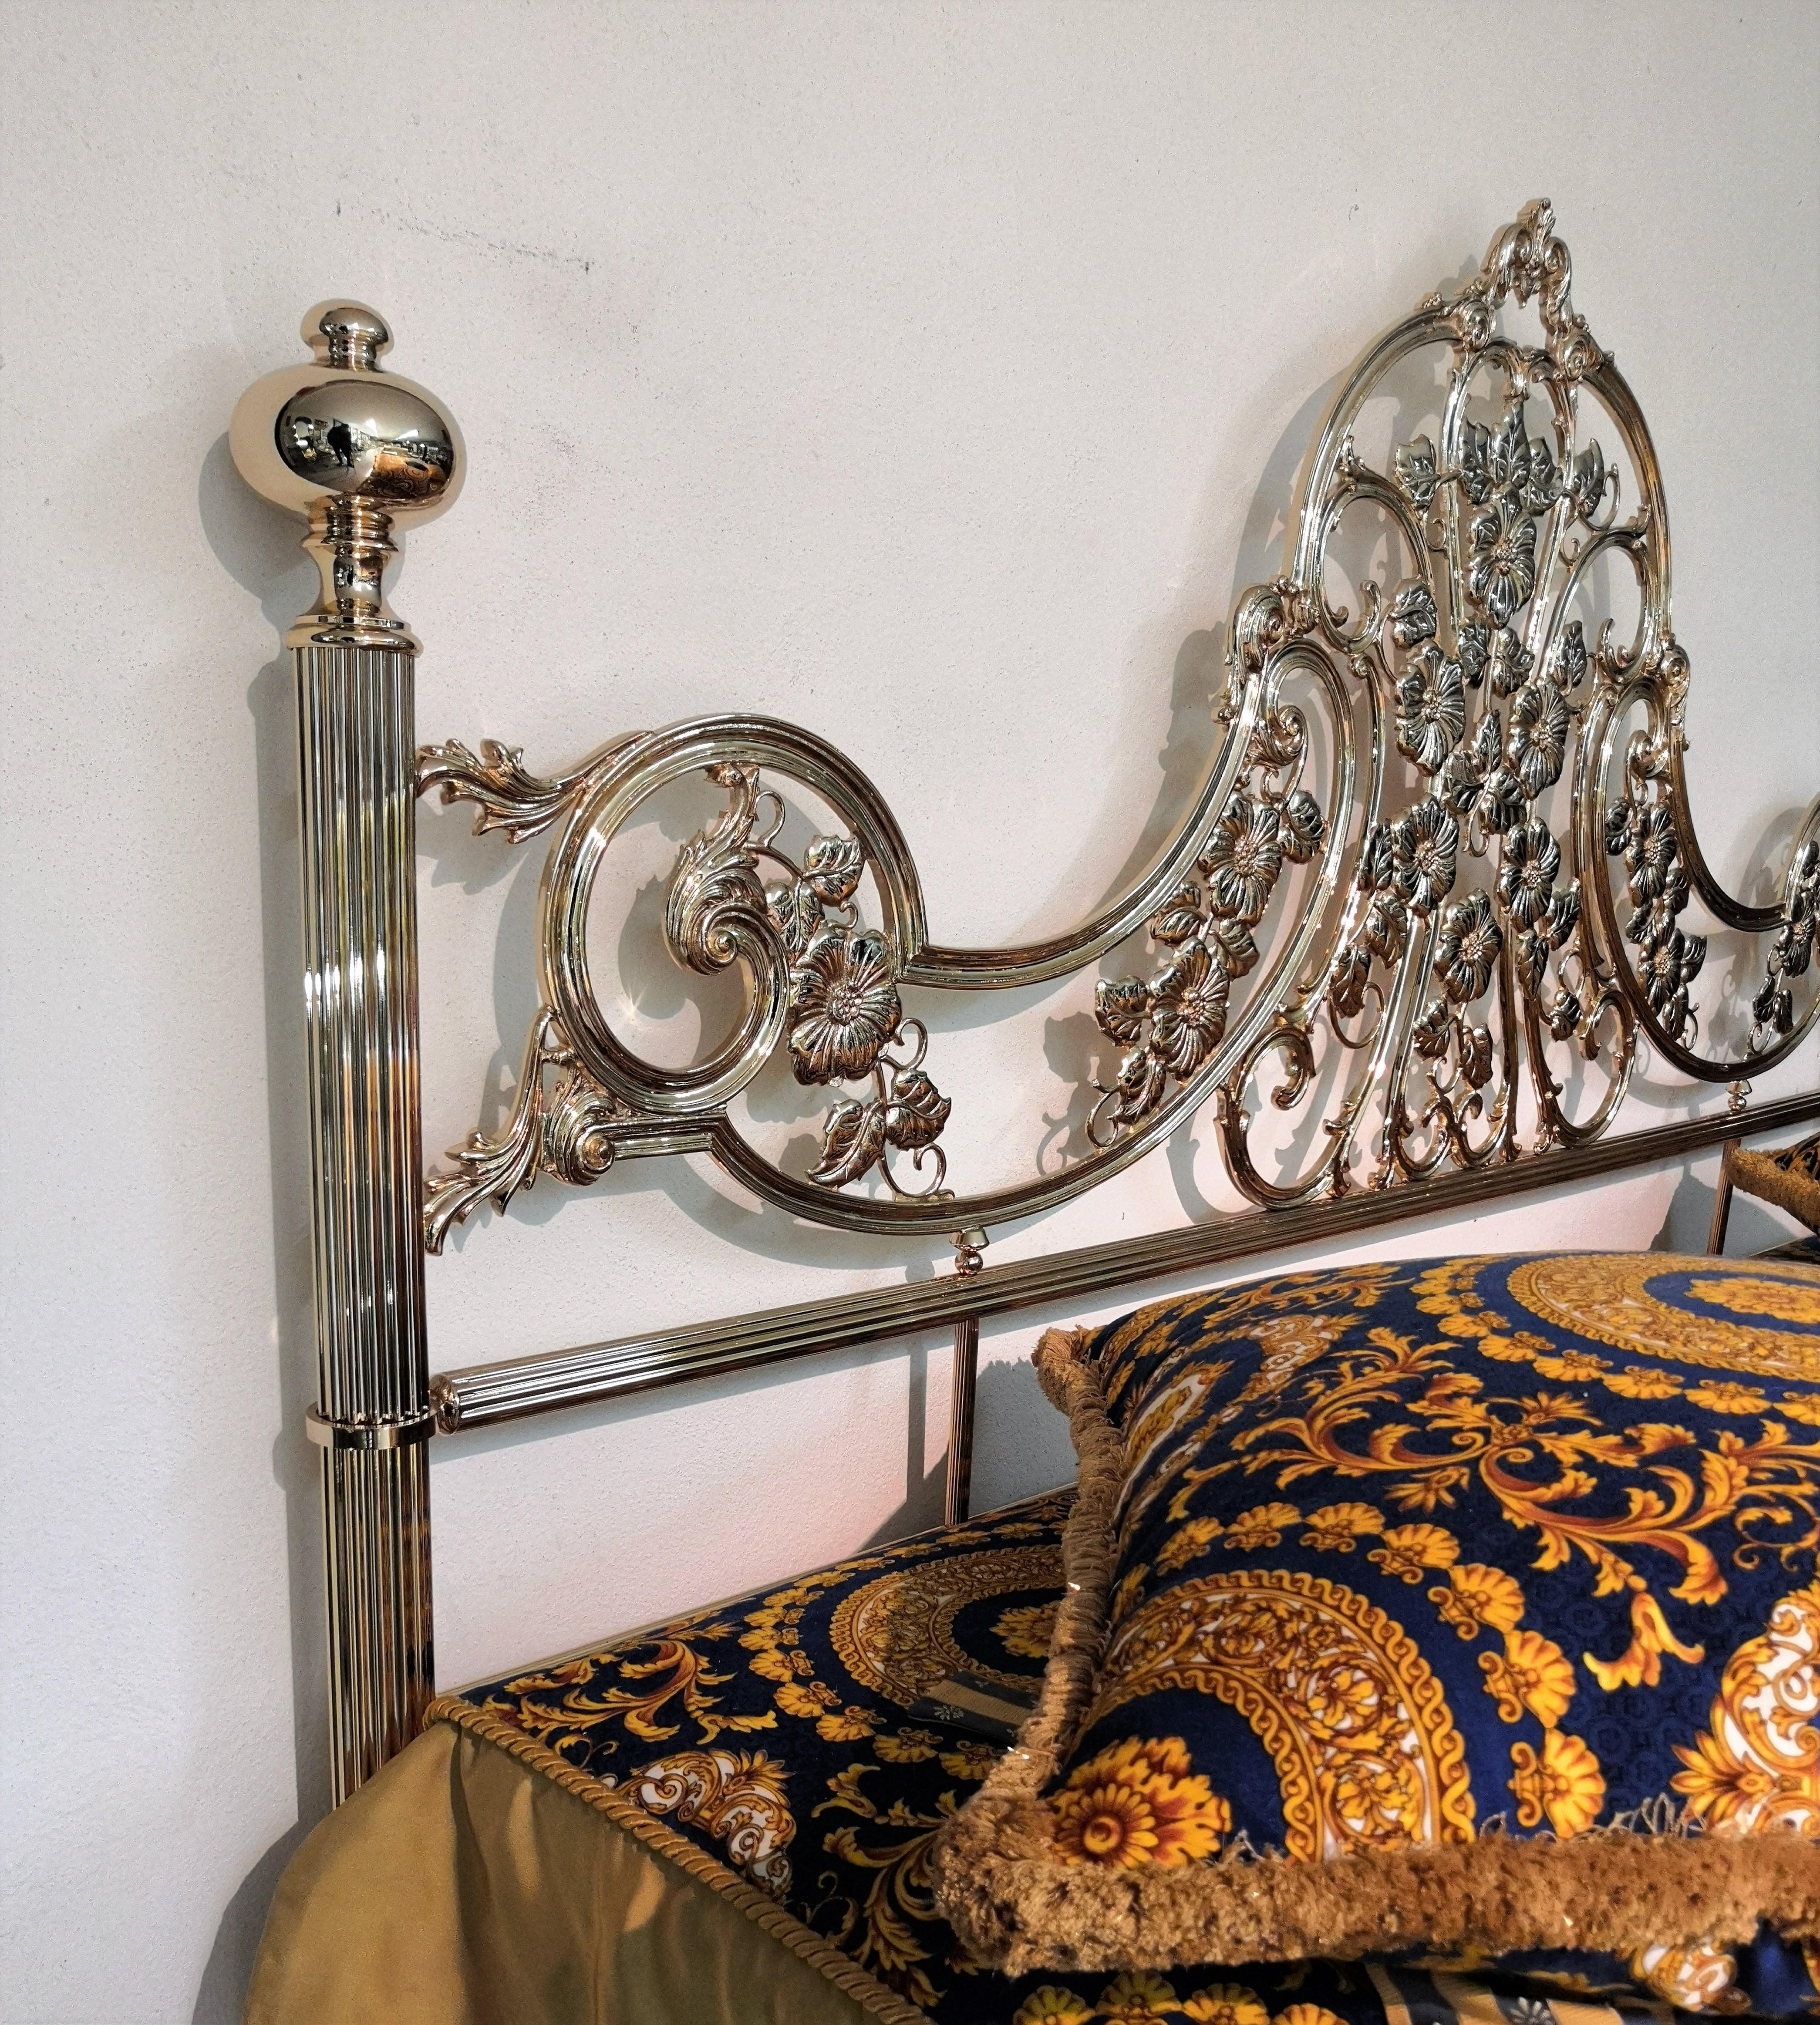 Beautiful and stylish Italian geometric and Baroque shiny brass king size bed frame. A great piece that perfectly adds to every home decor the typical glitz, glamour, and gold of Hollywood Regency style, with a nod to Art Deco decadence and